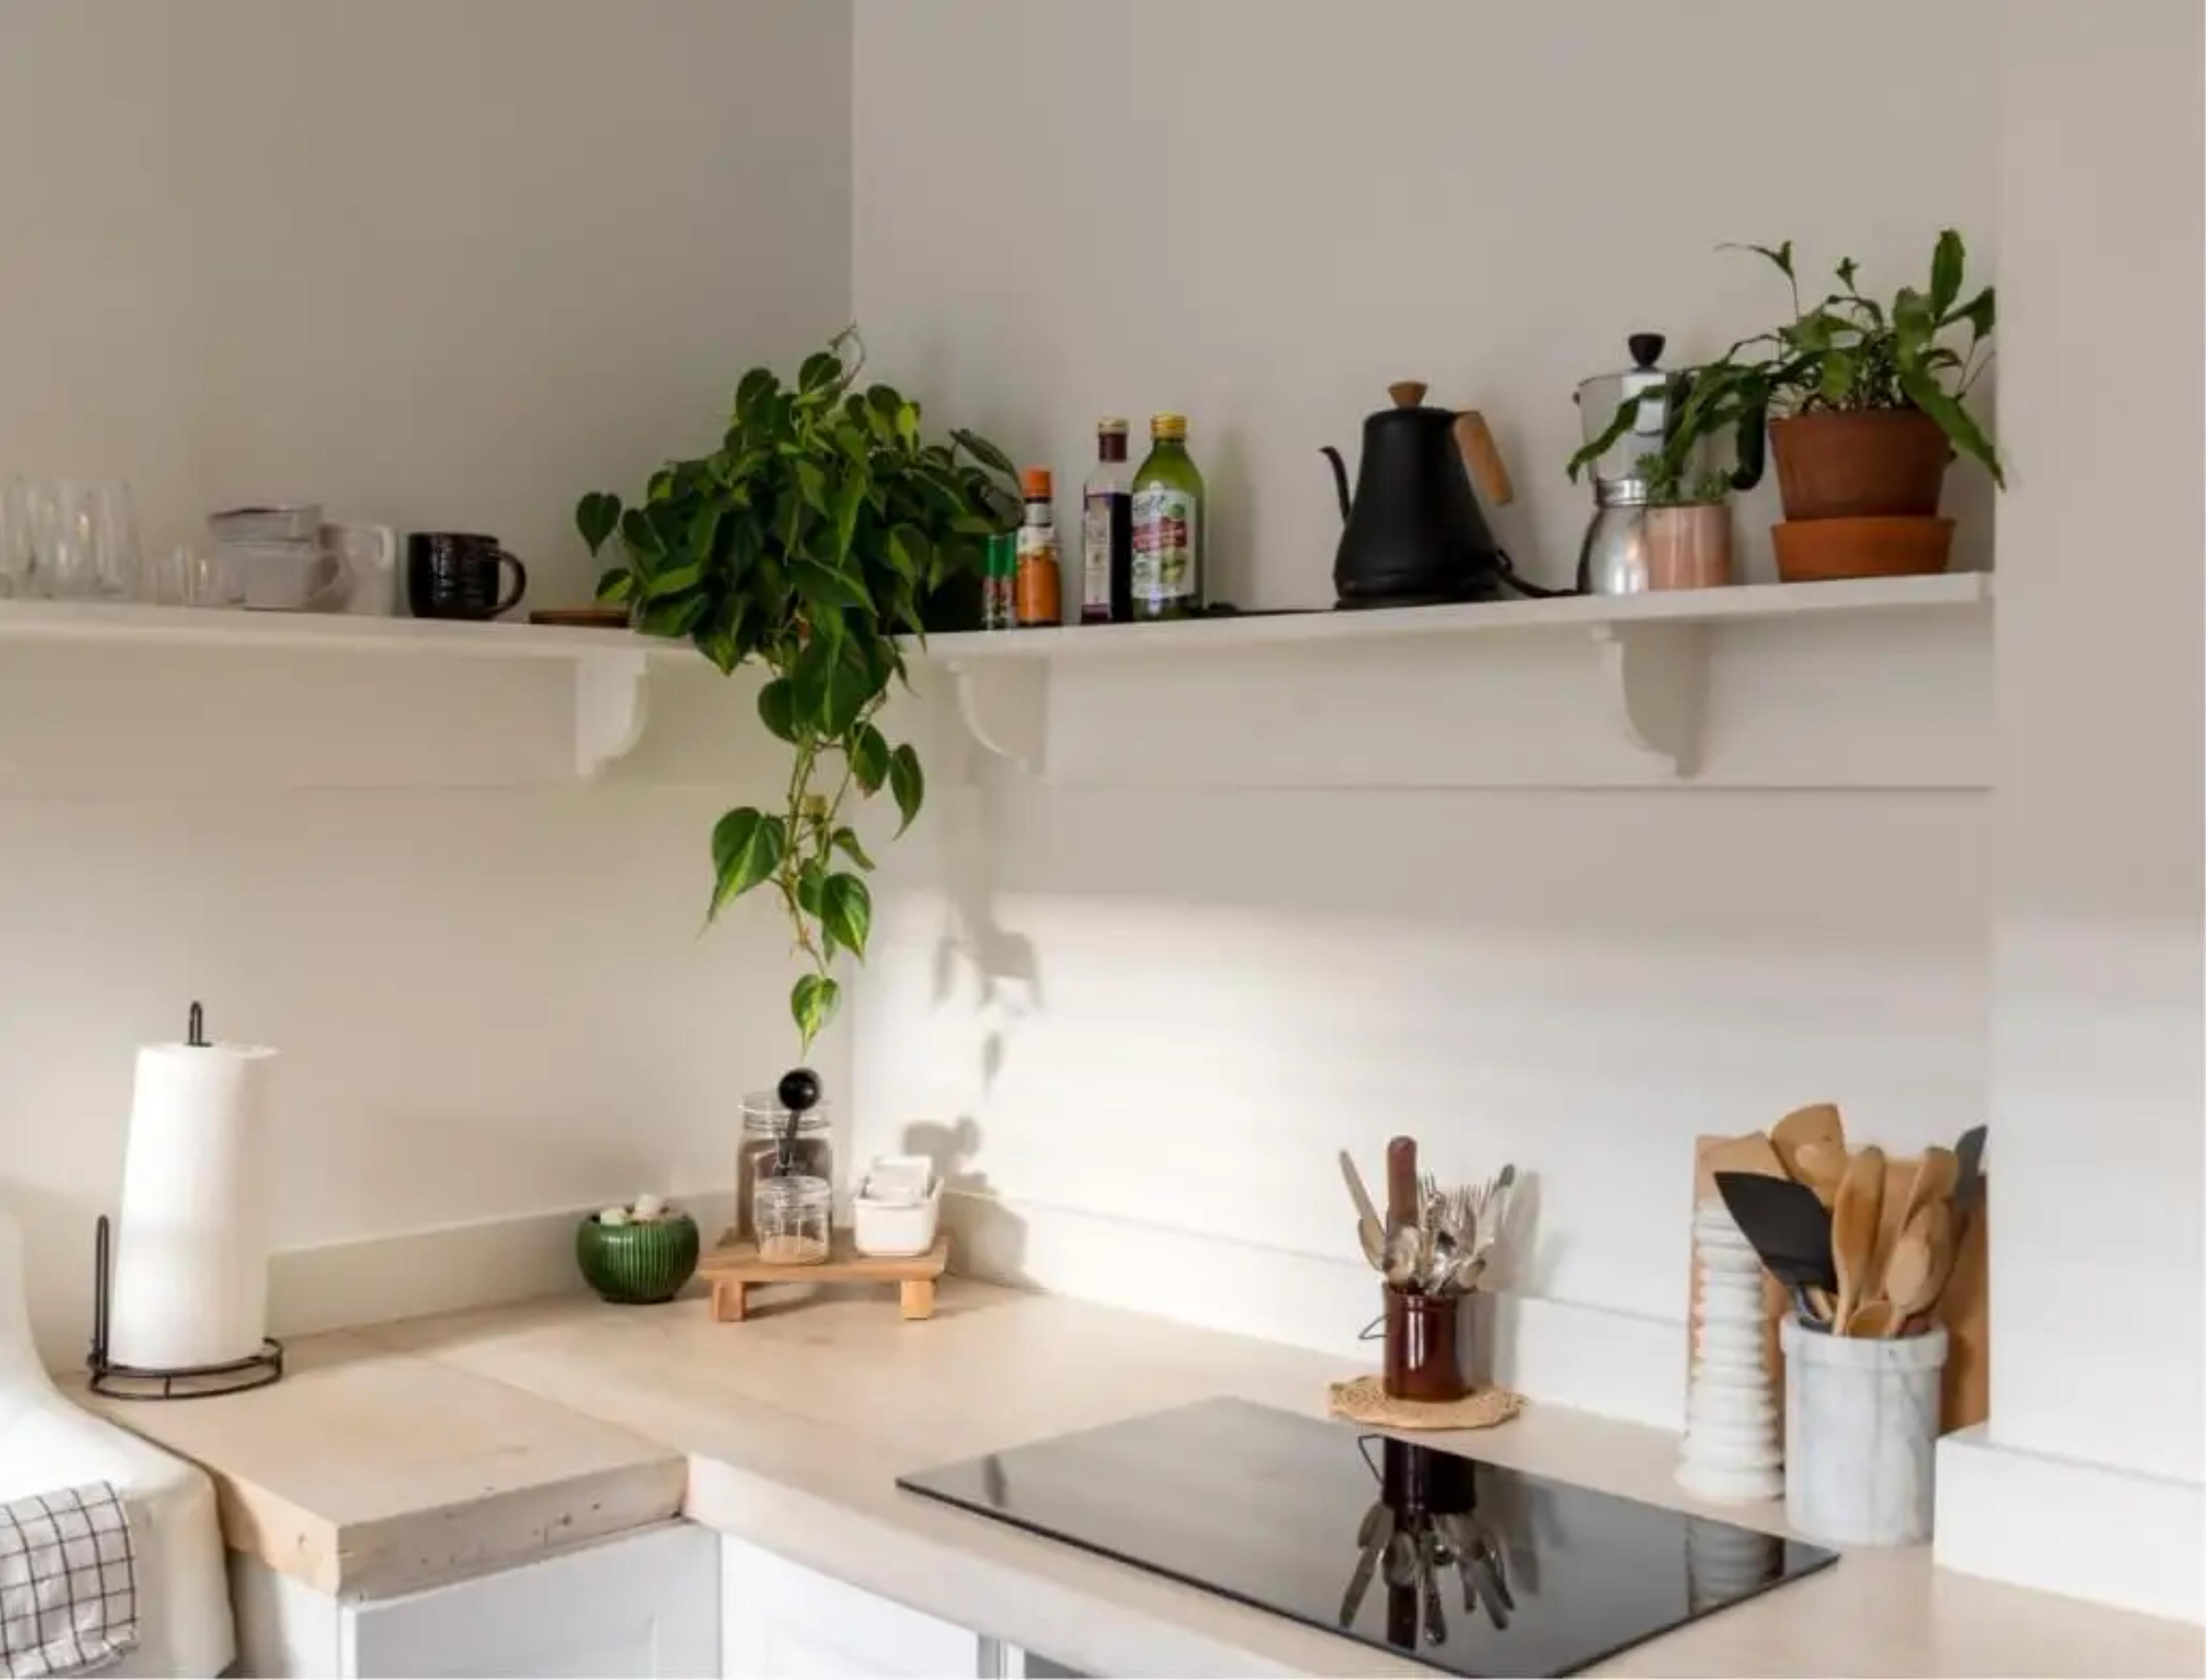 Kitchen with house plant